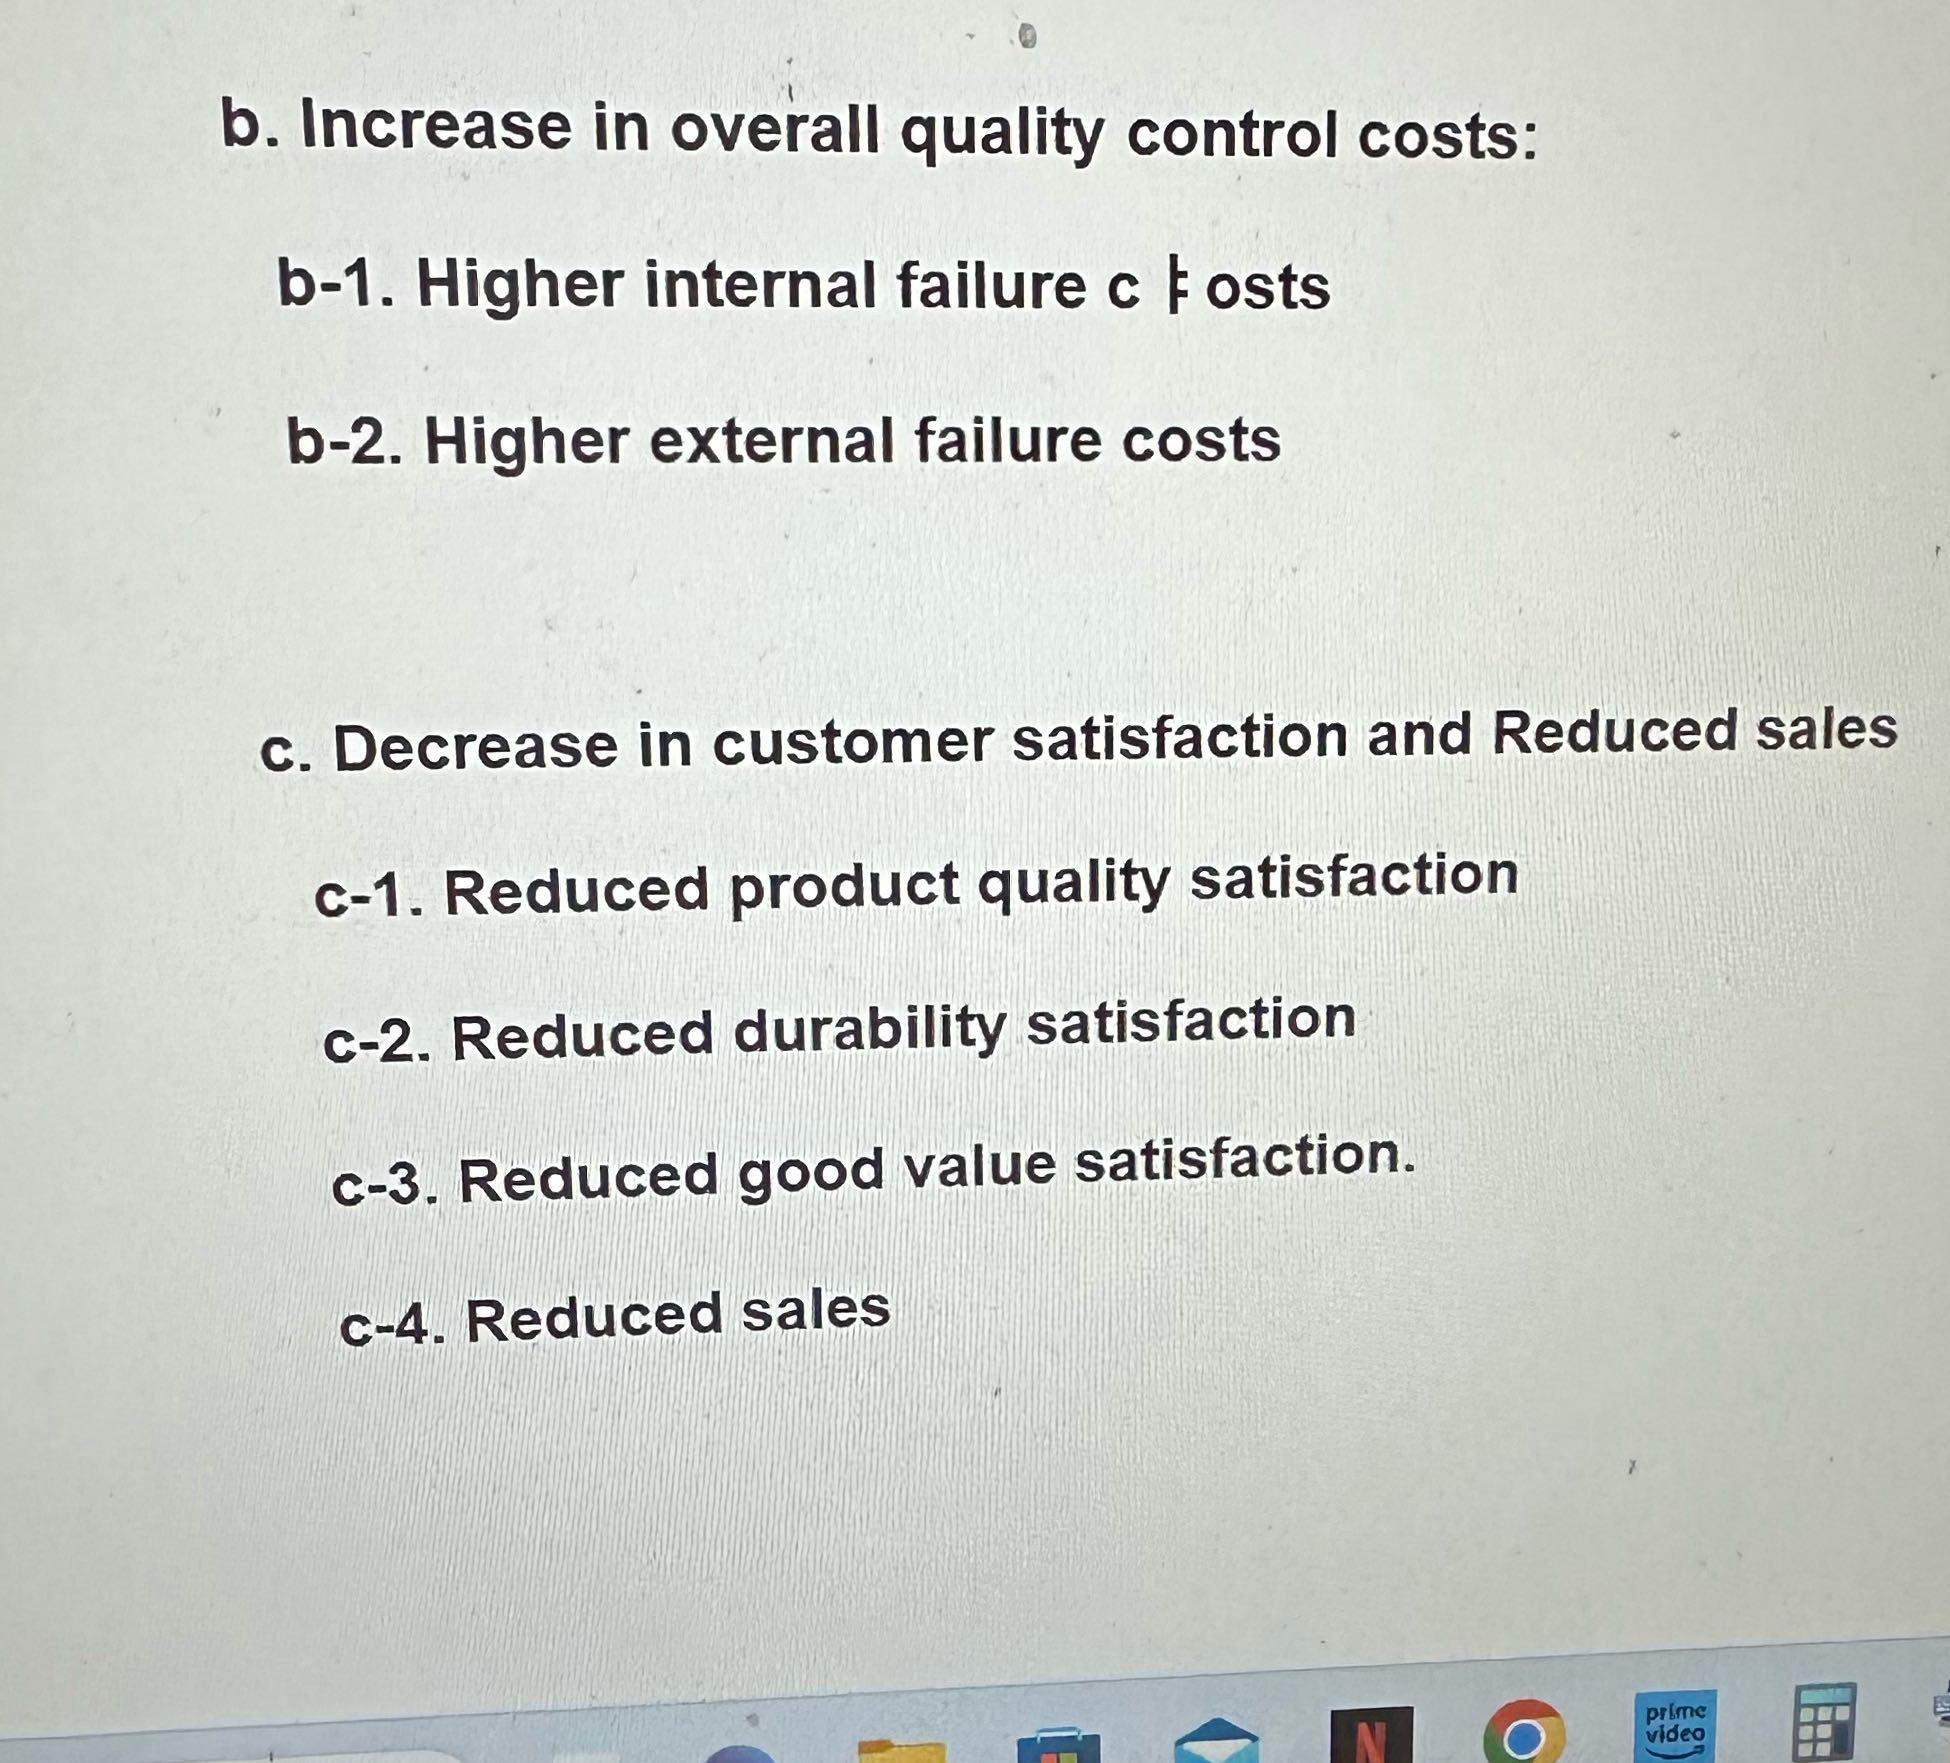 b. Increase in overall quality control costs: b-1. Higher internal failure c Fosts b-2. Higher external